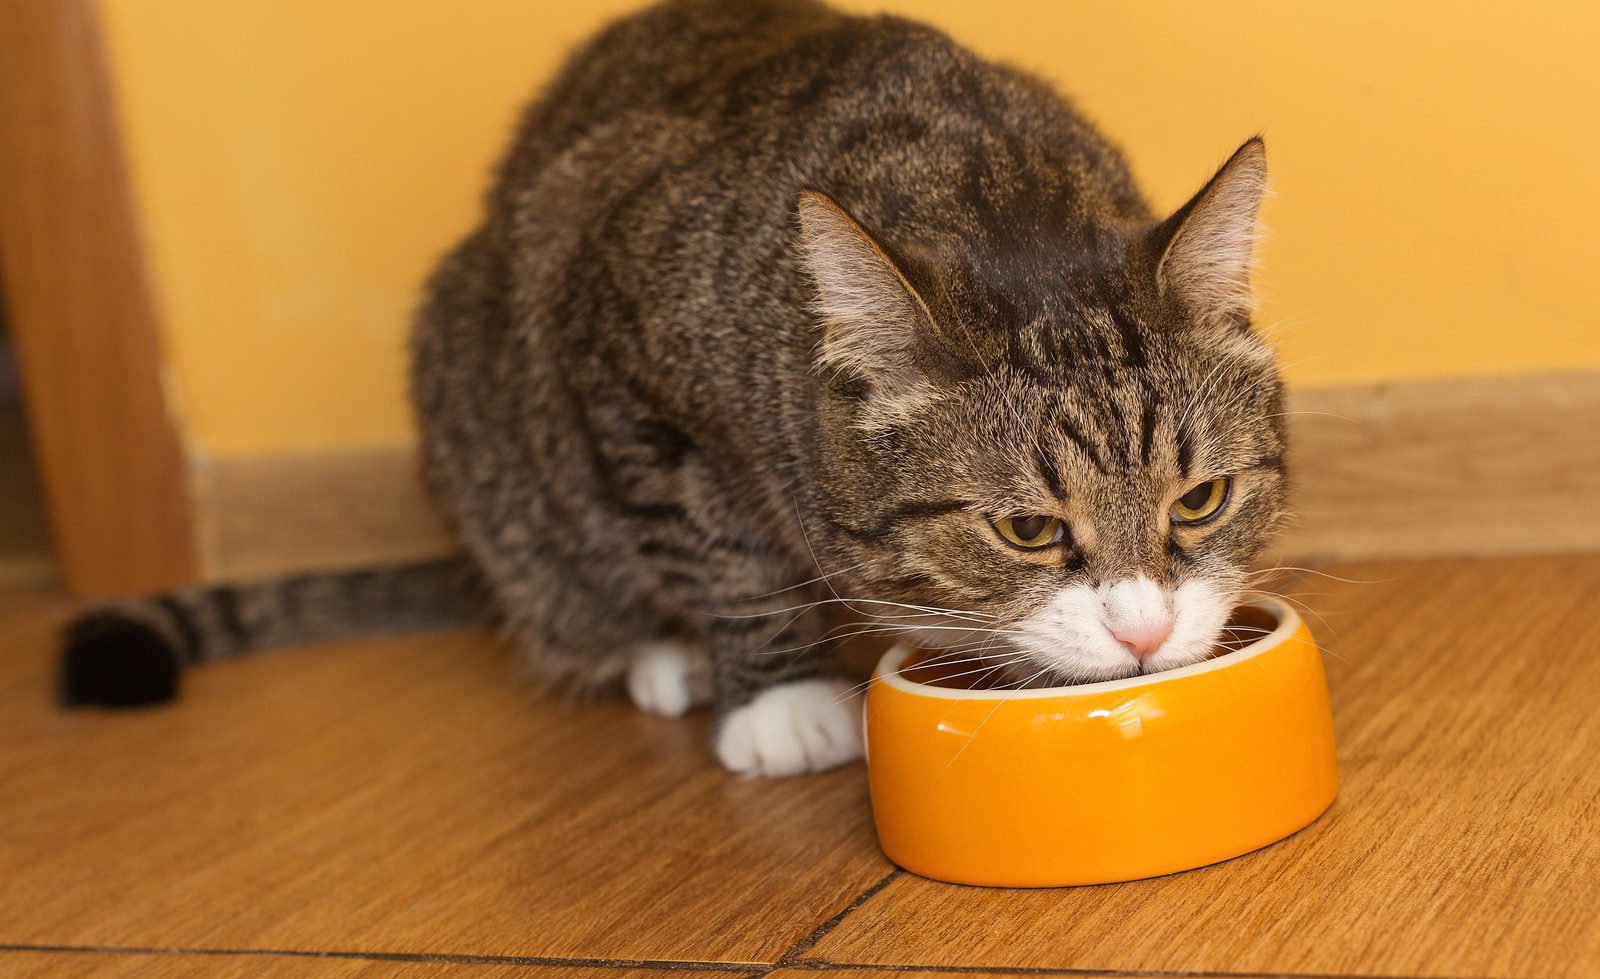 Choosing healthy food for cats: everything you need to know about it